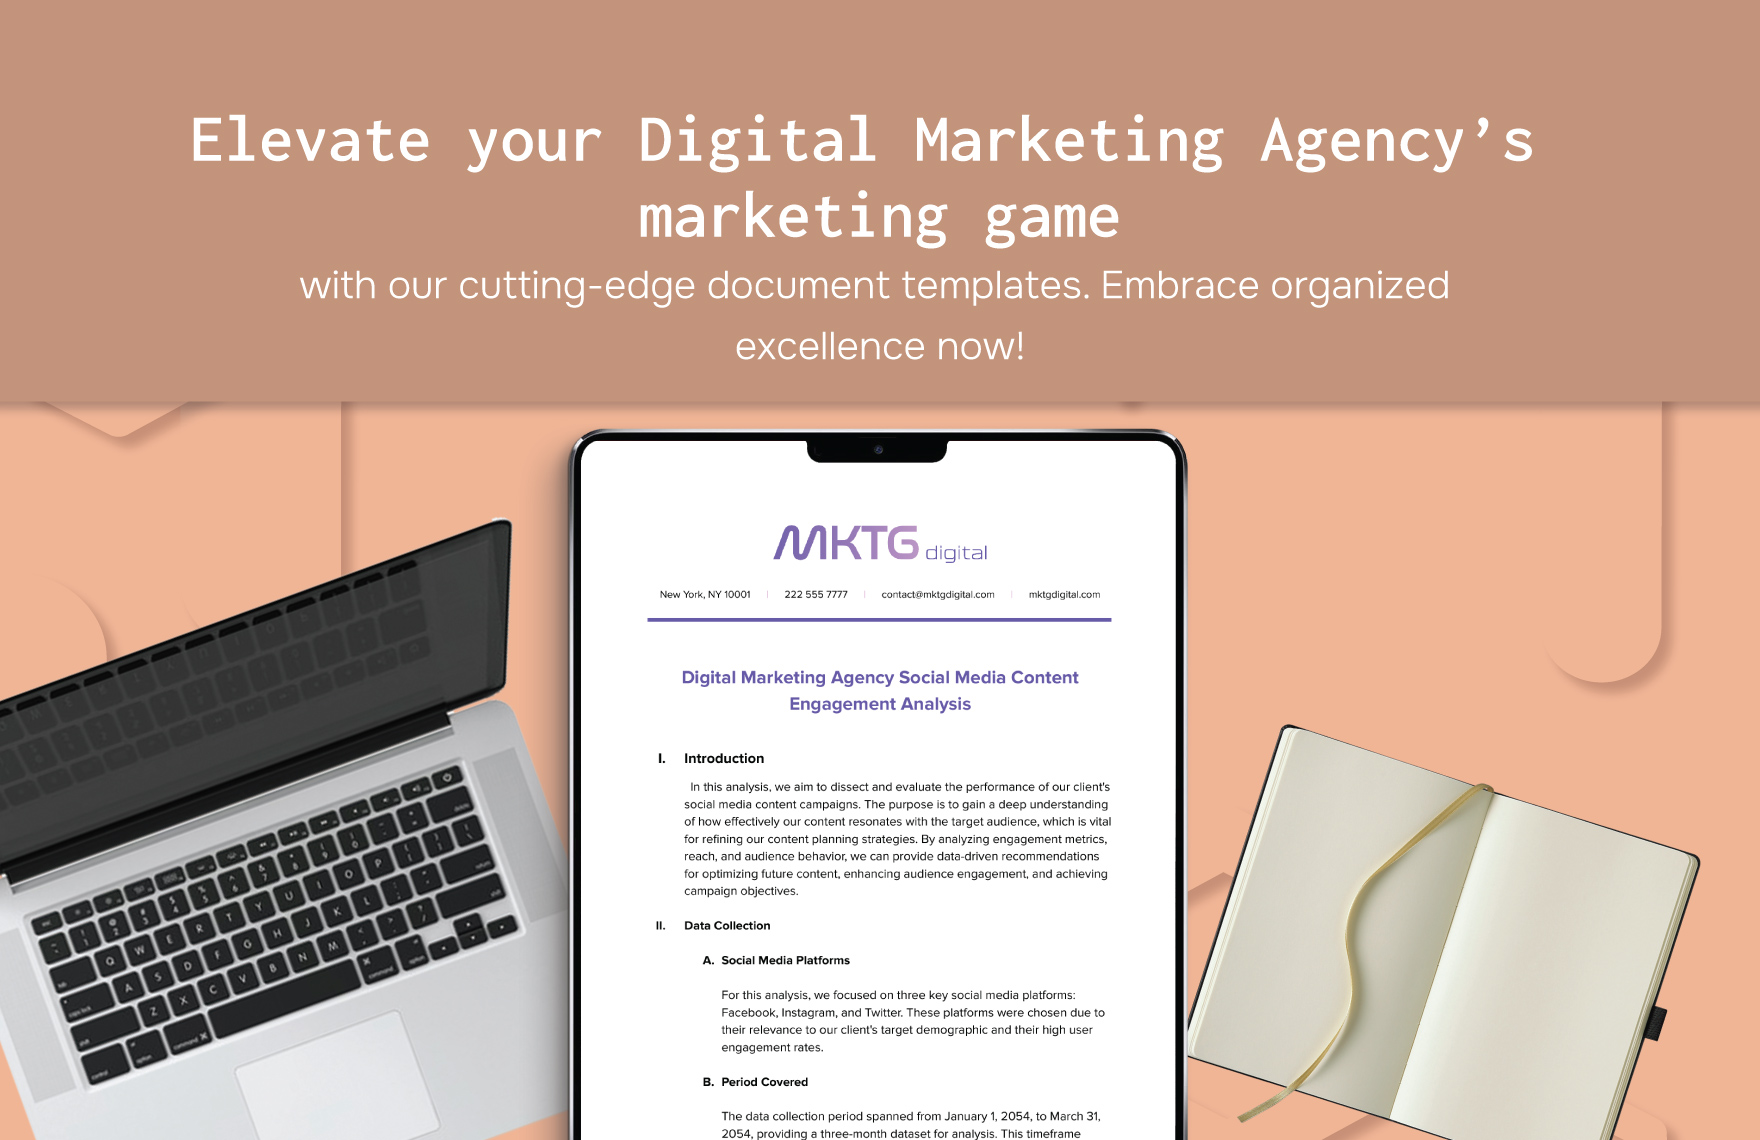 Digital Marketing Agency Social Media Content Engagement Analysis Template